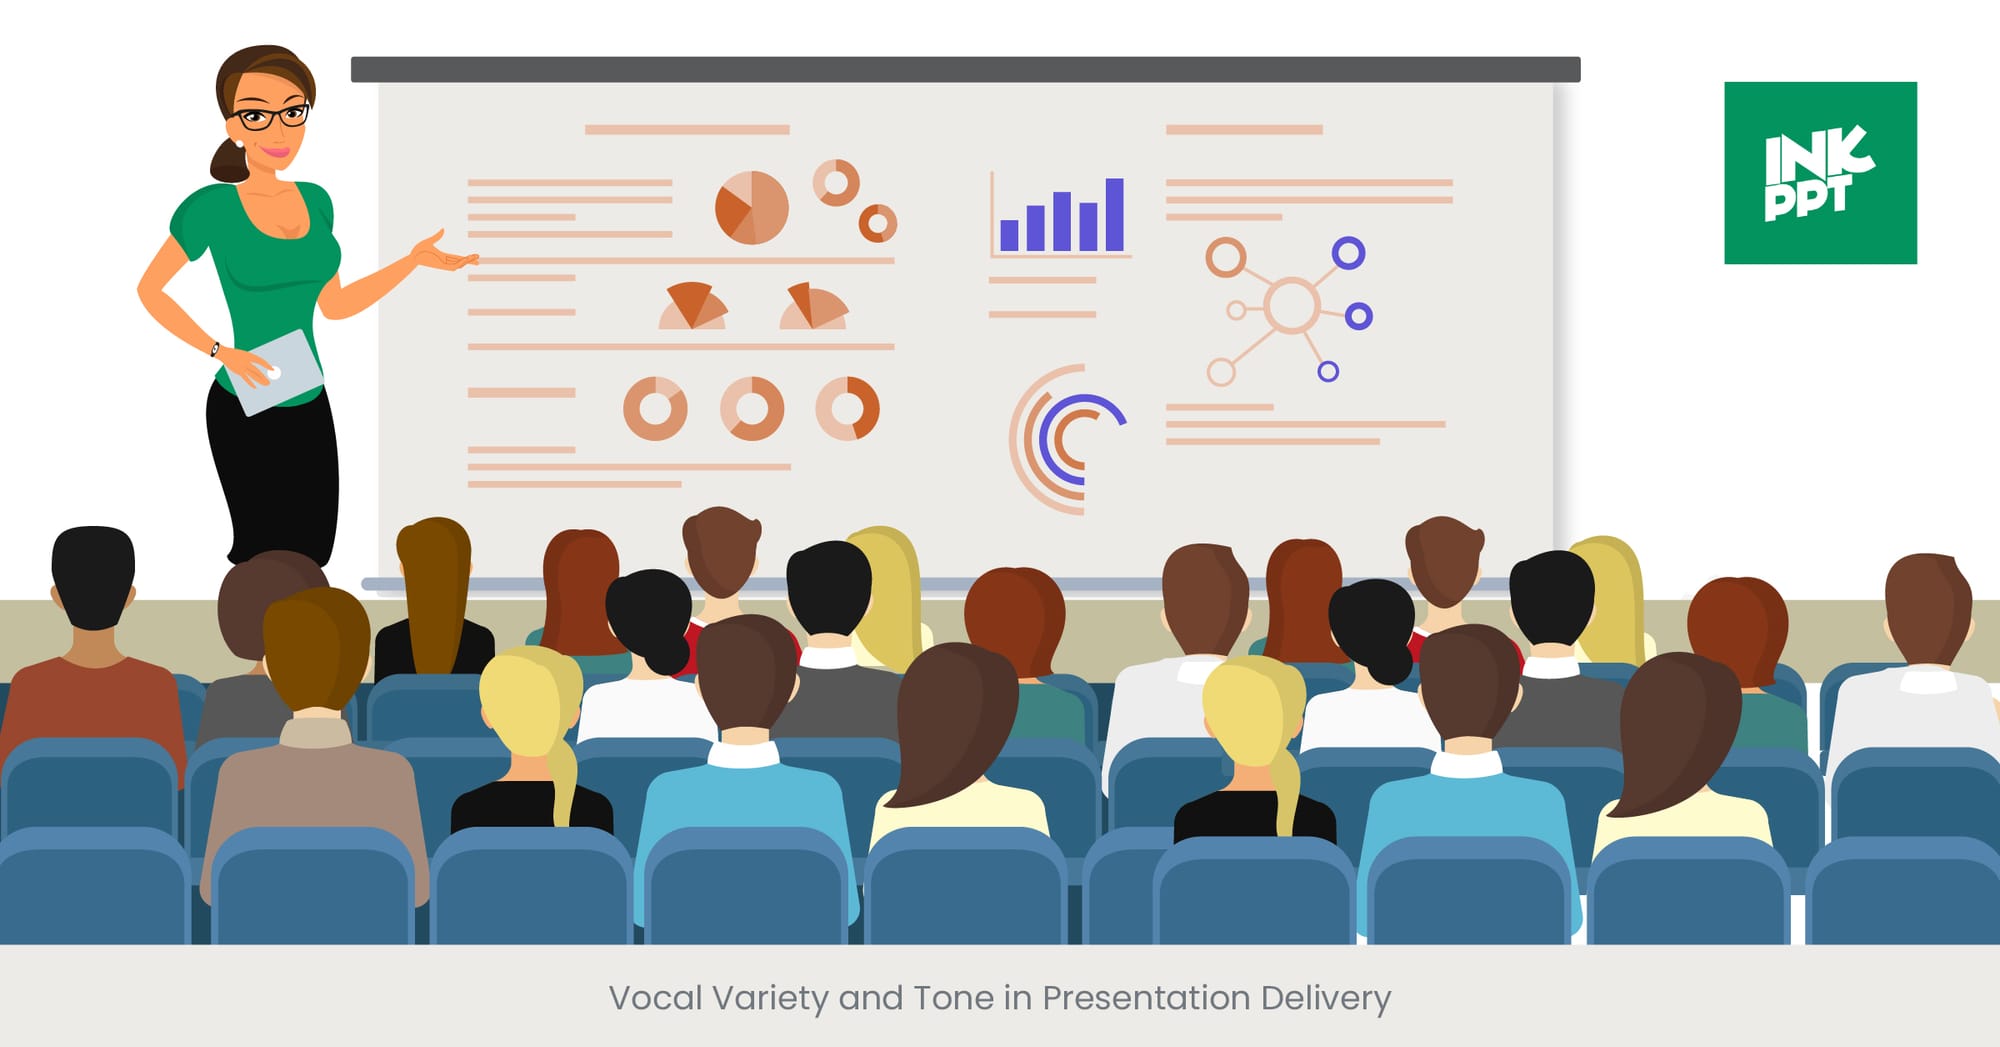 Vocal Variety and Tone in Presentation Delivery